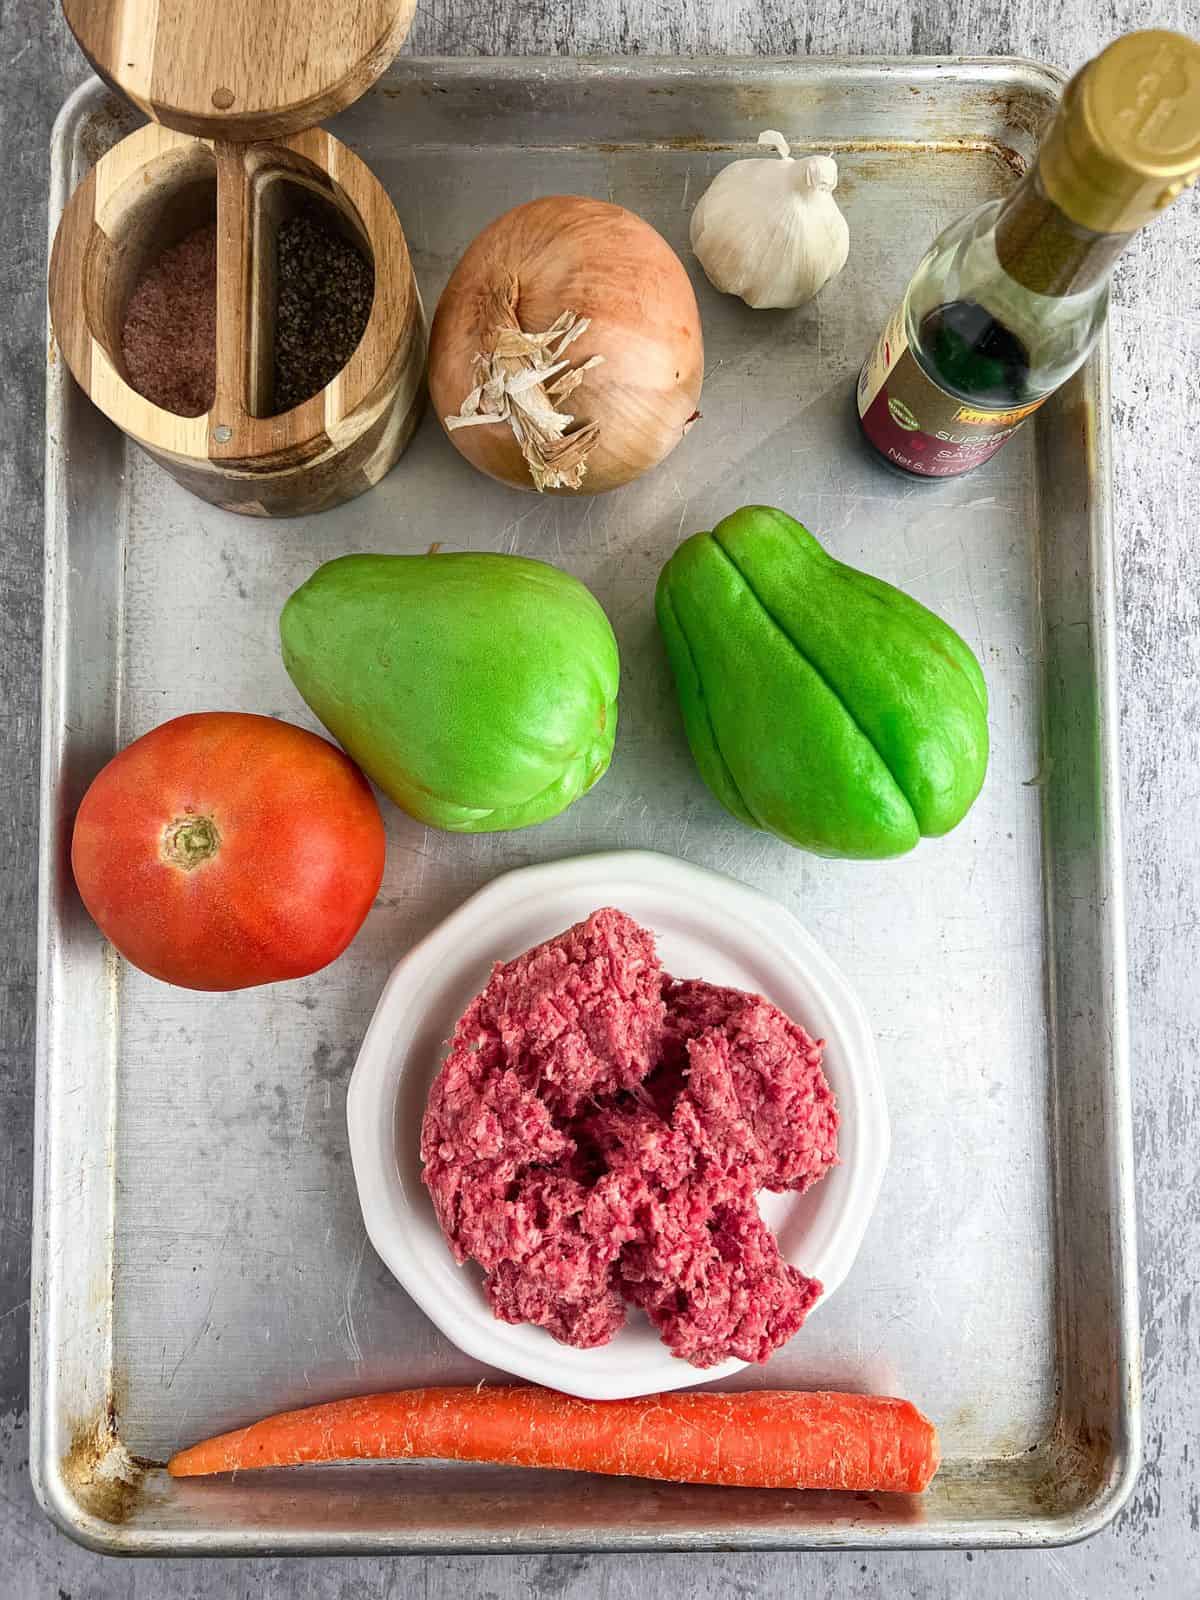 Ingredients to dinisang sayote.